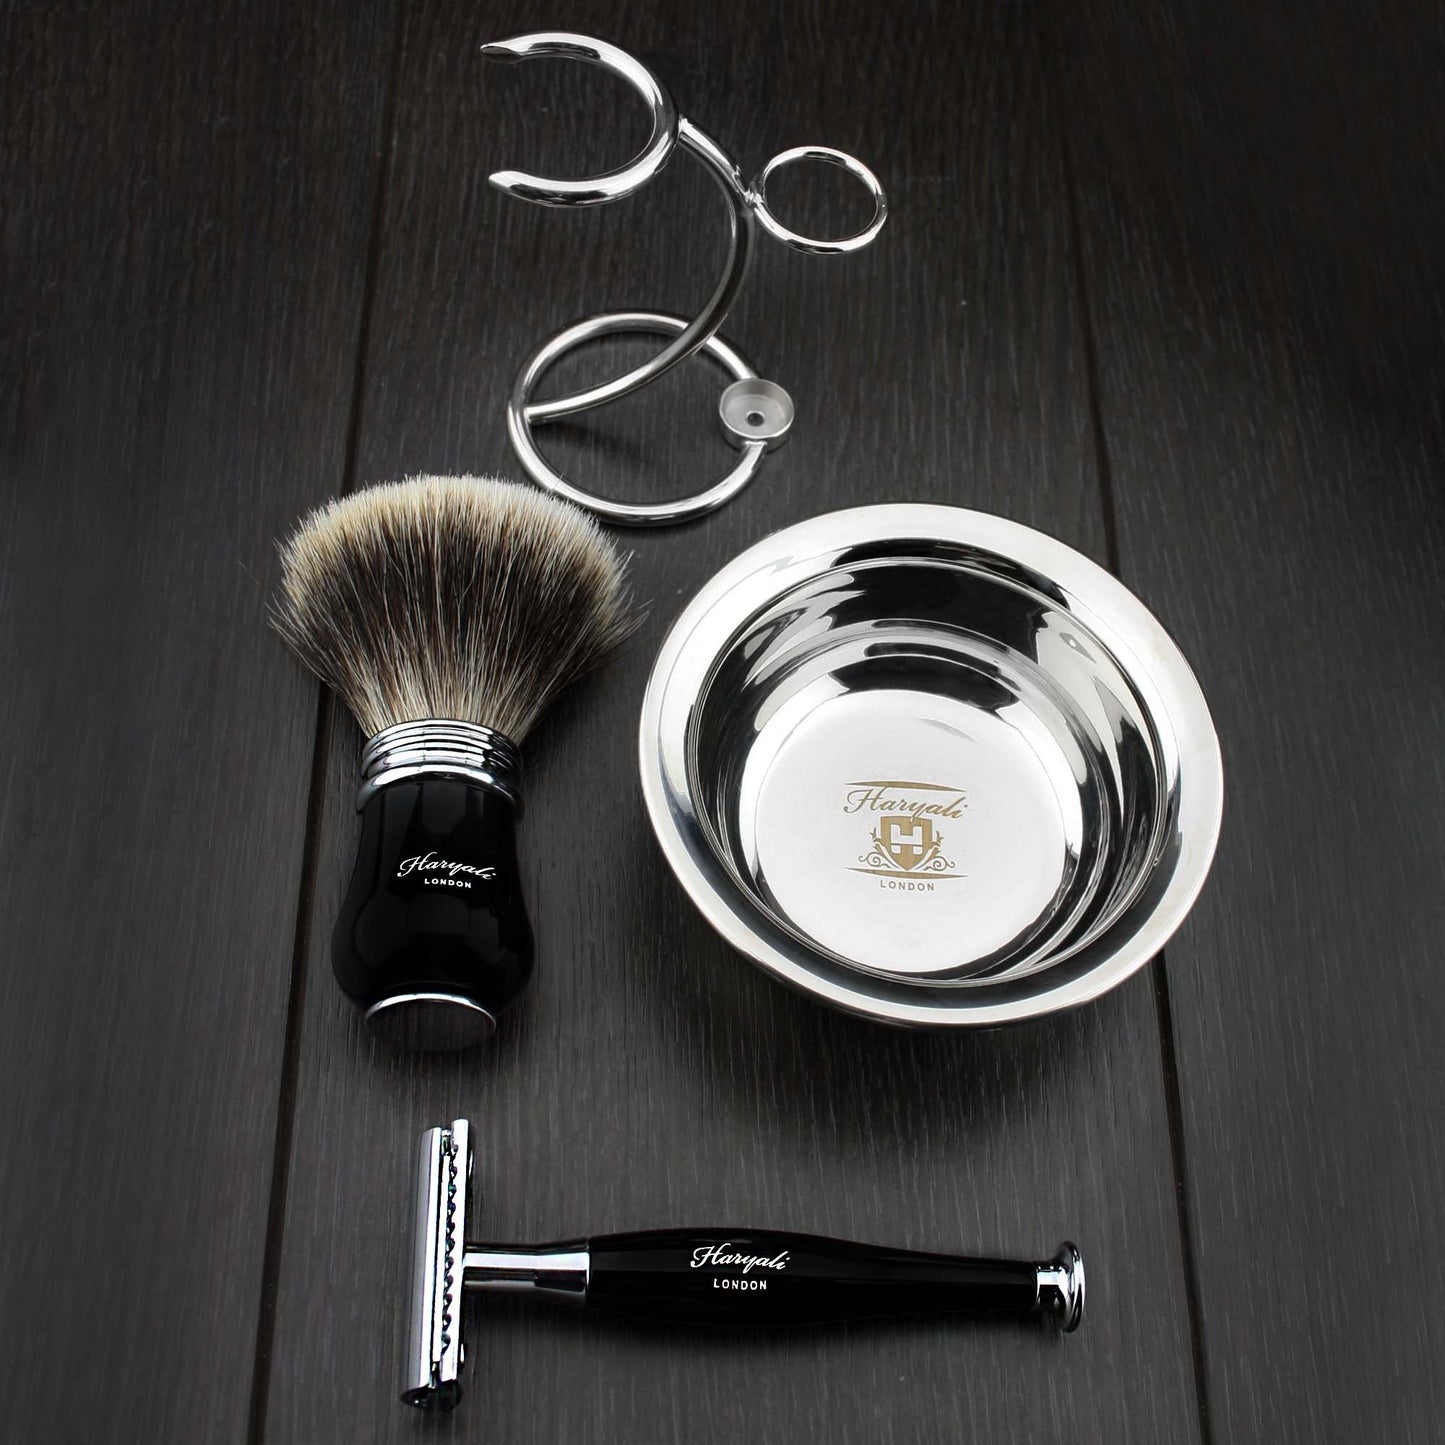 Ready to Use 4 Pcs Men's Shaving Set with Double Edge Safety Razor, Sliver Tip Badger Hair Brush, Stand and Steel Soap Bowl